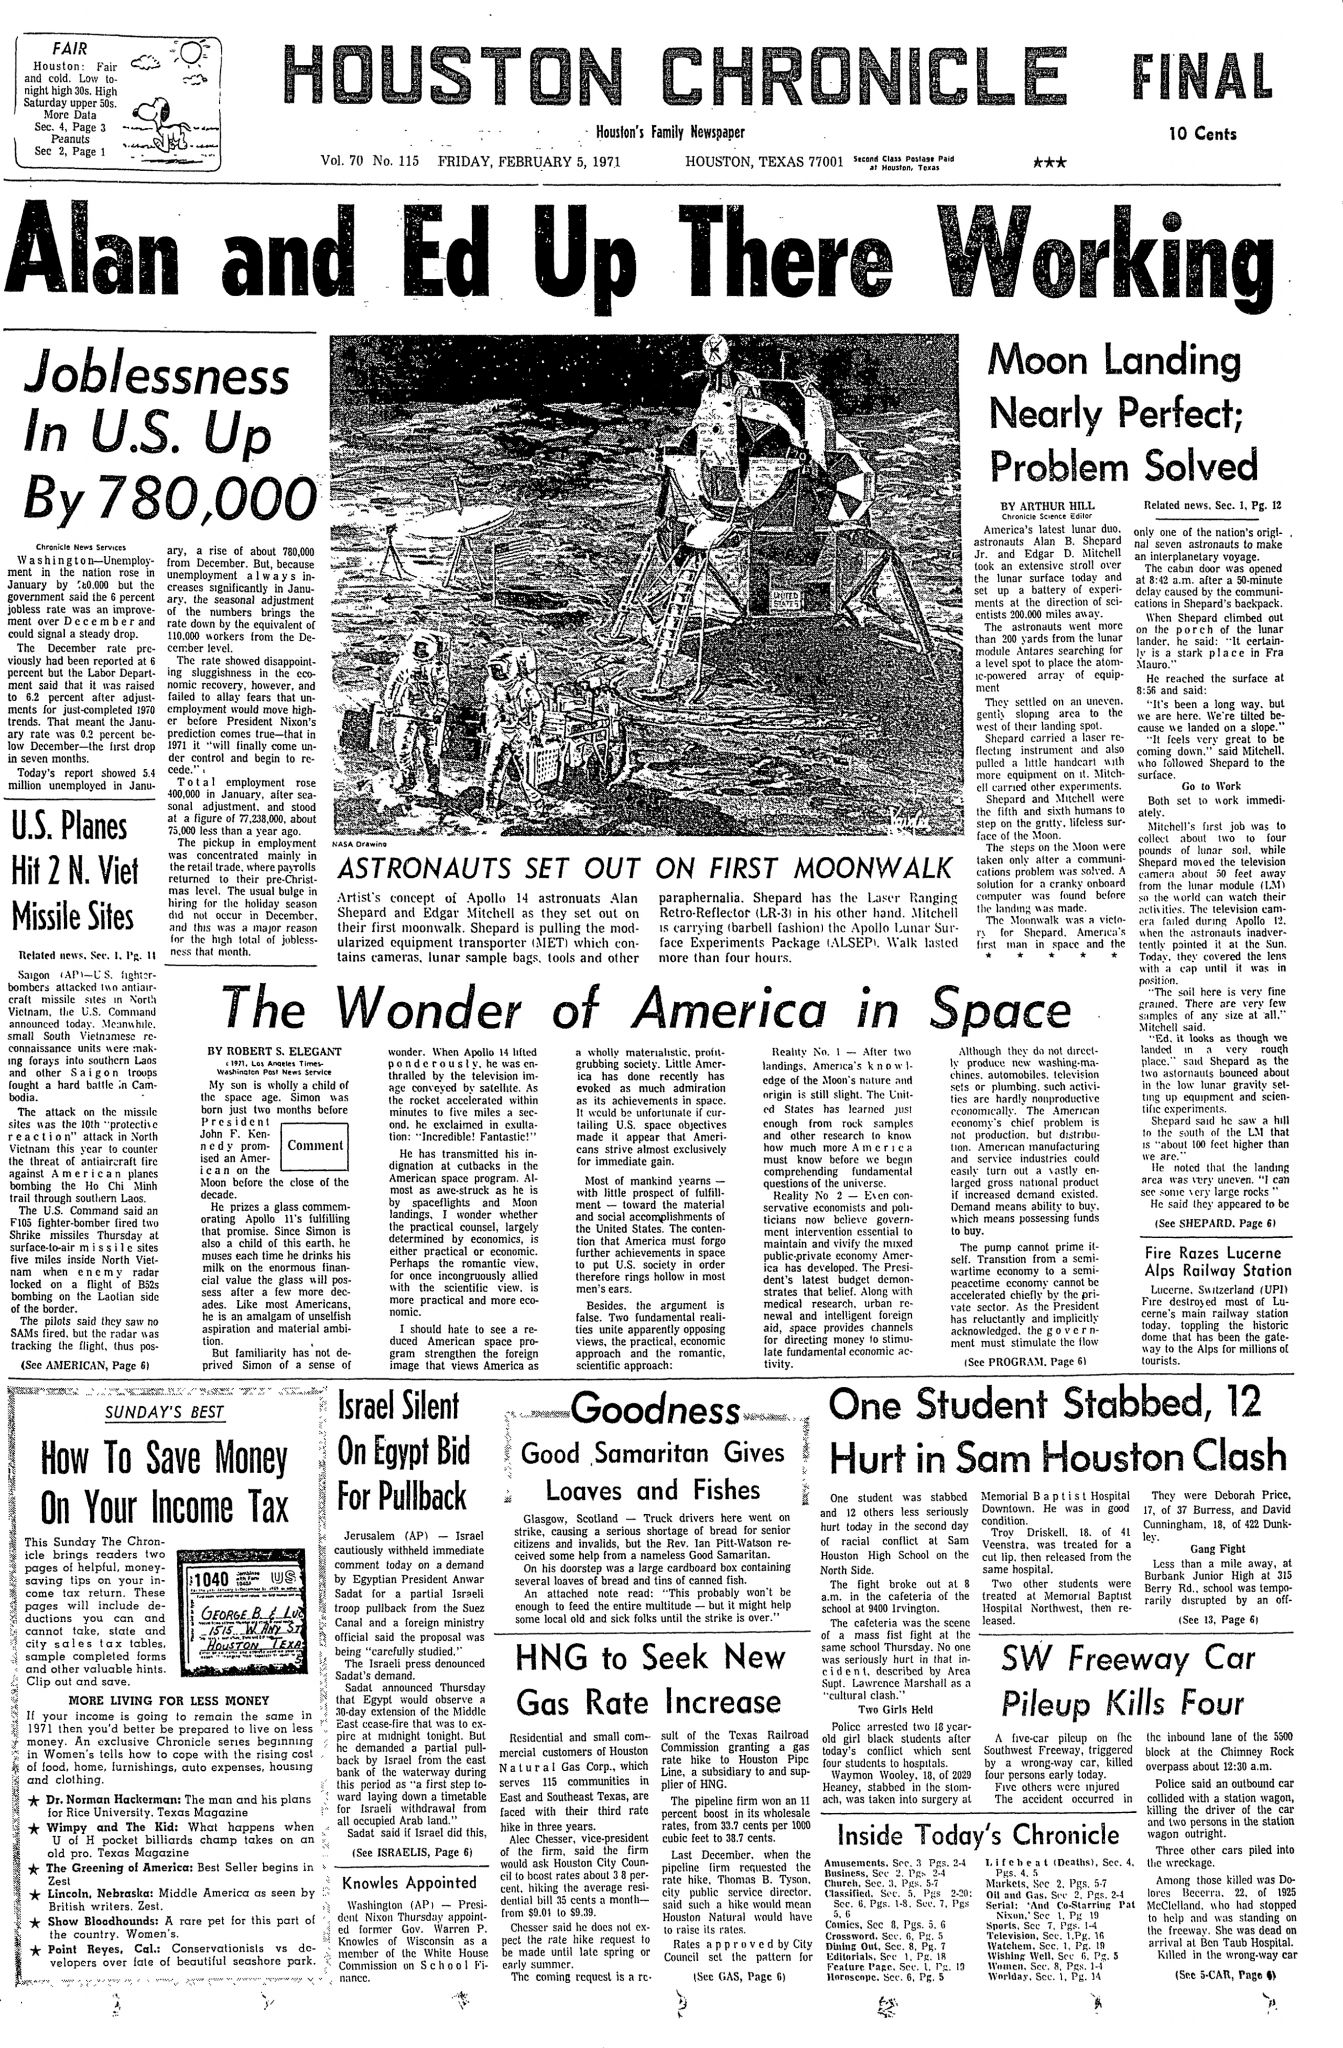 Houston Chronicle Page One Feb. 5, 1971